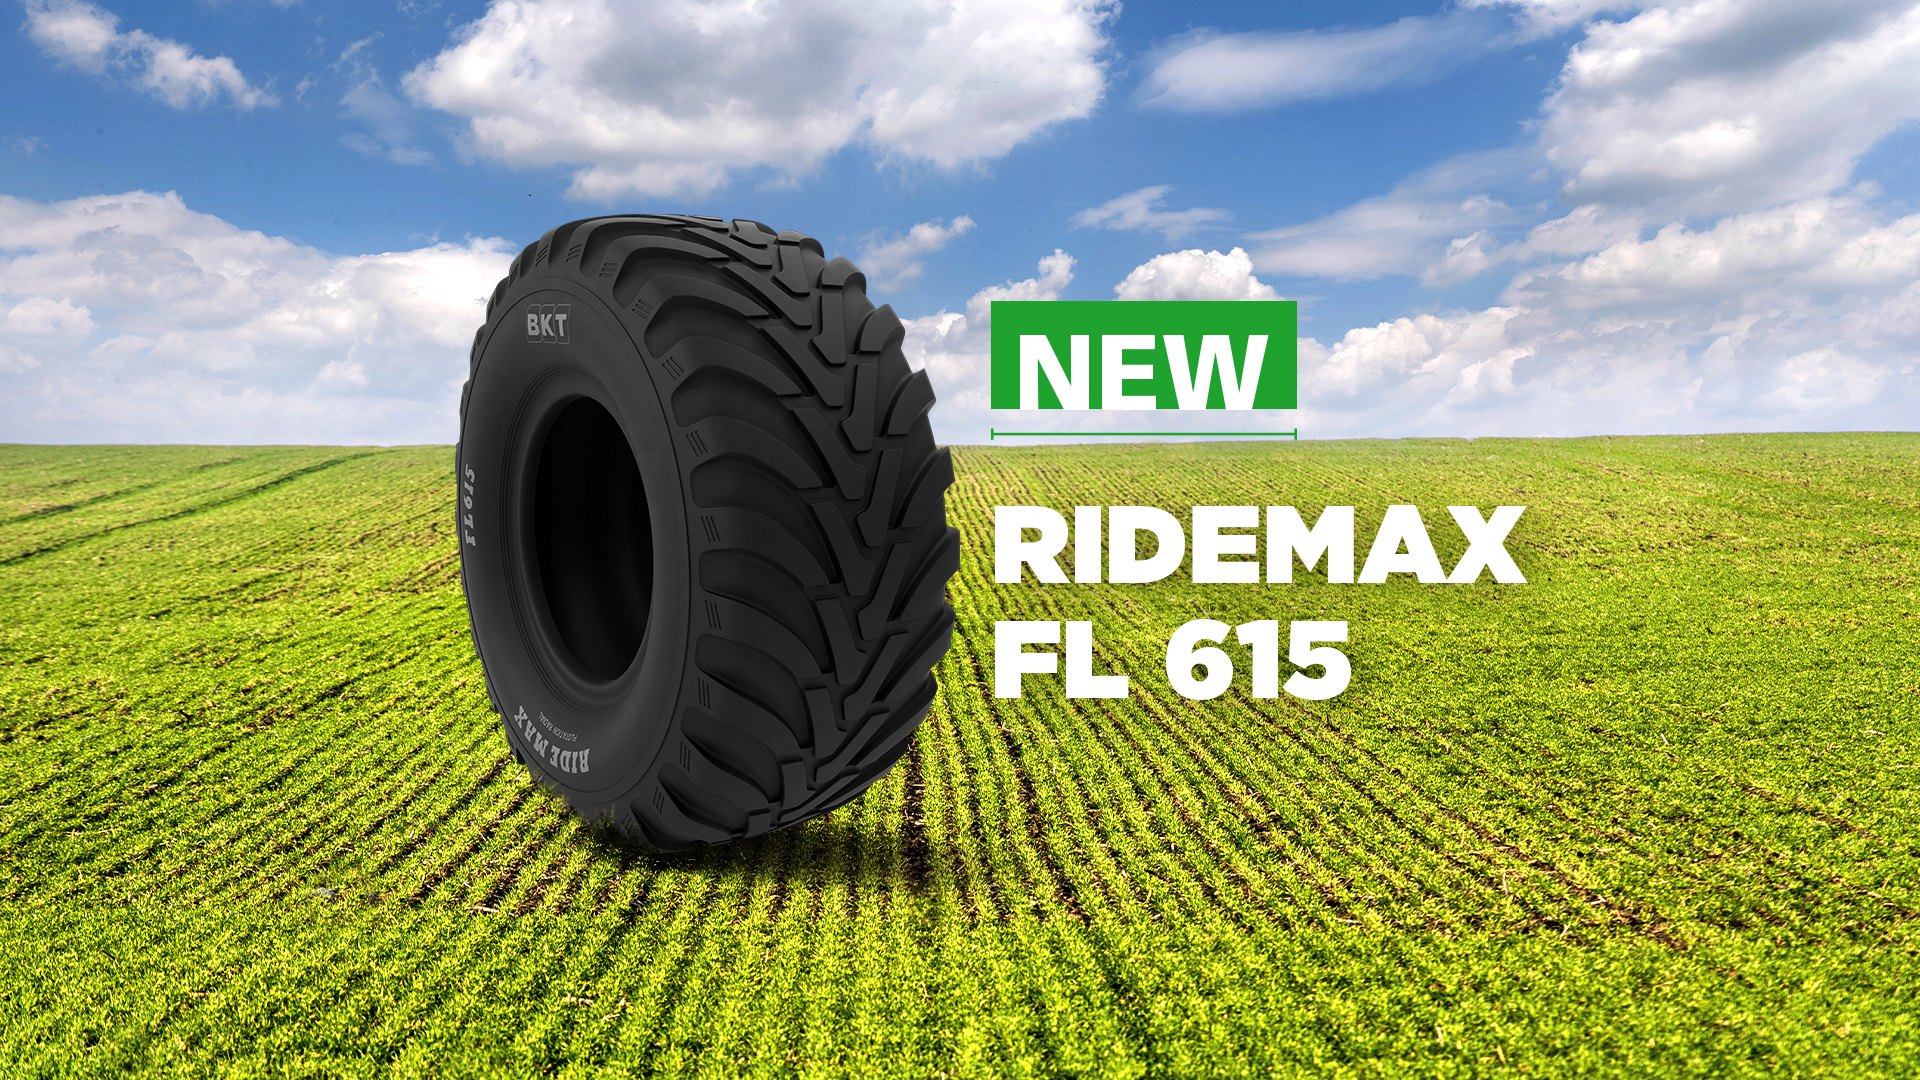 BKT launches RIDEMAX FL 615, the new flotation radial tire